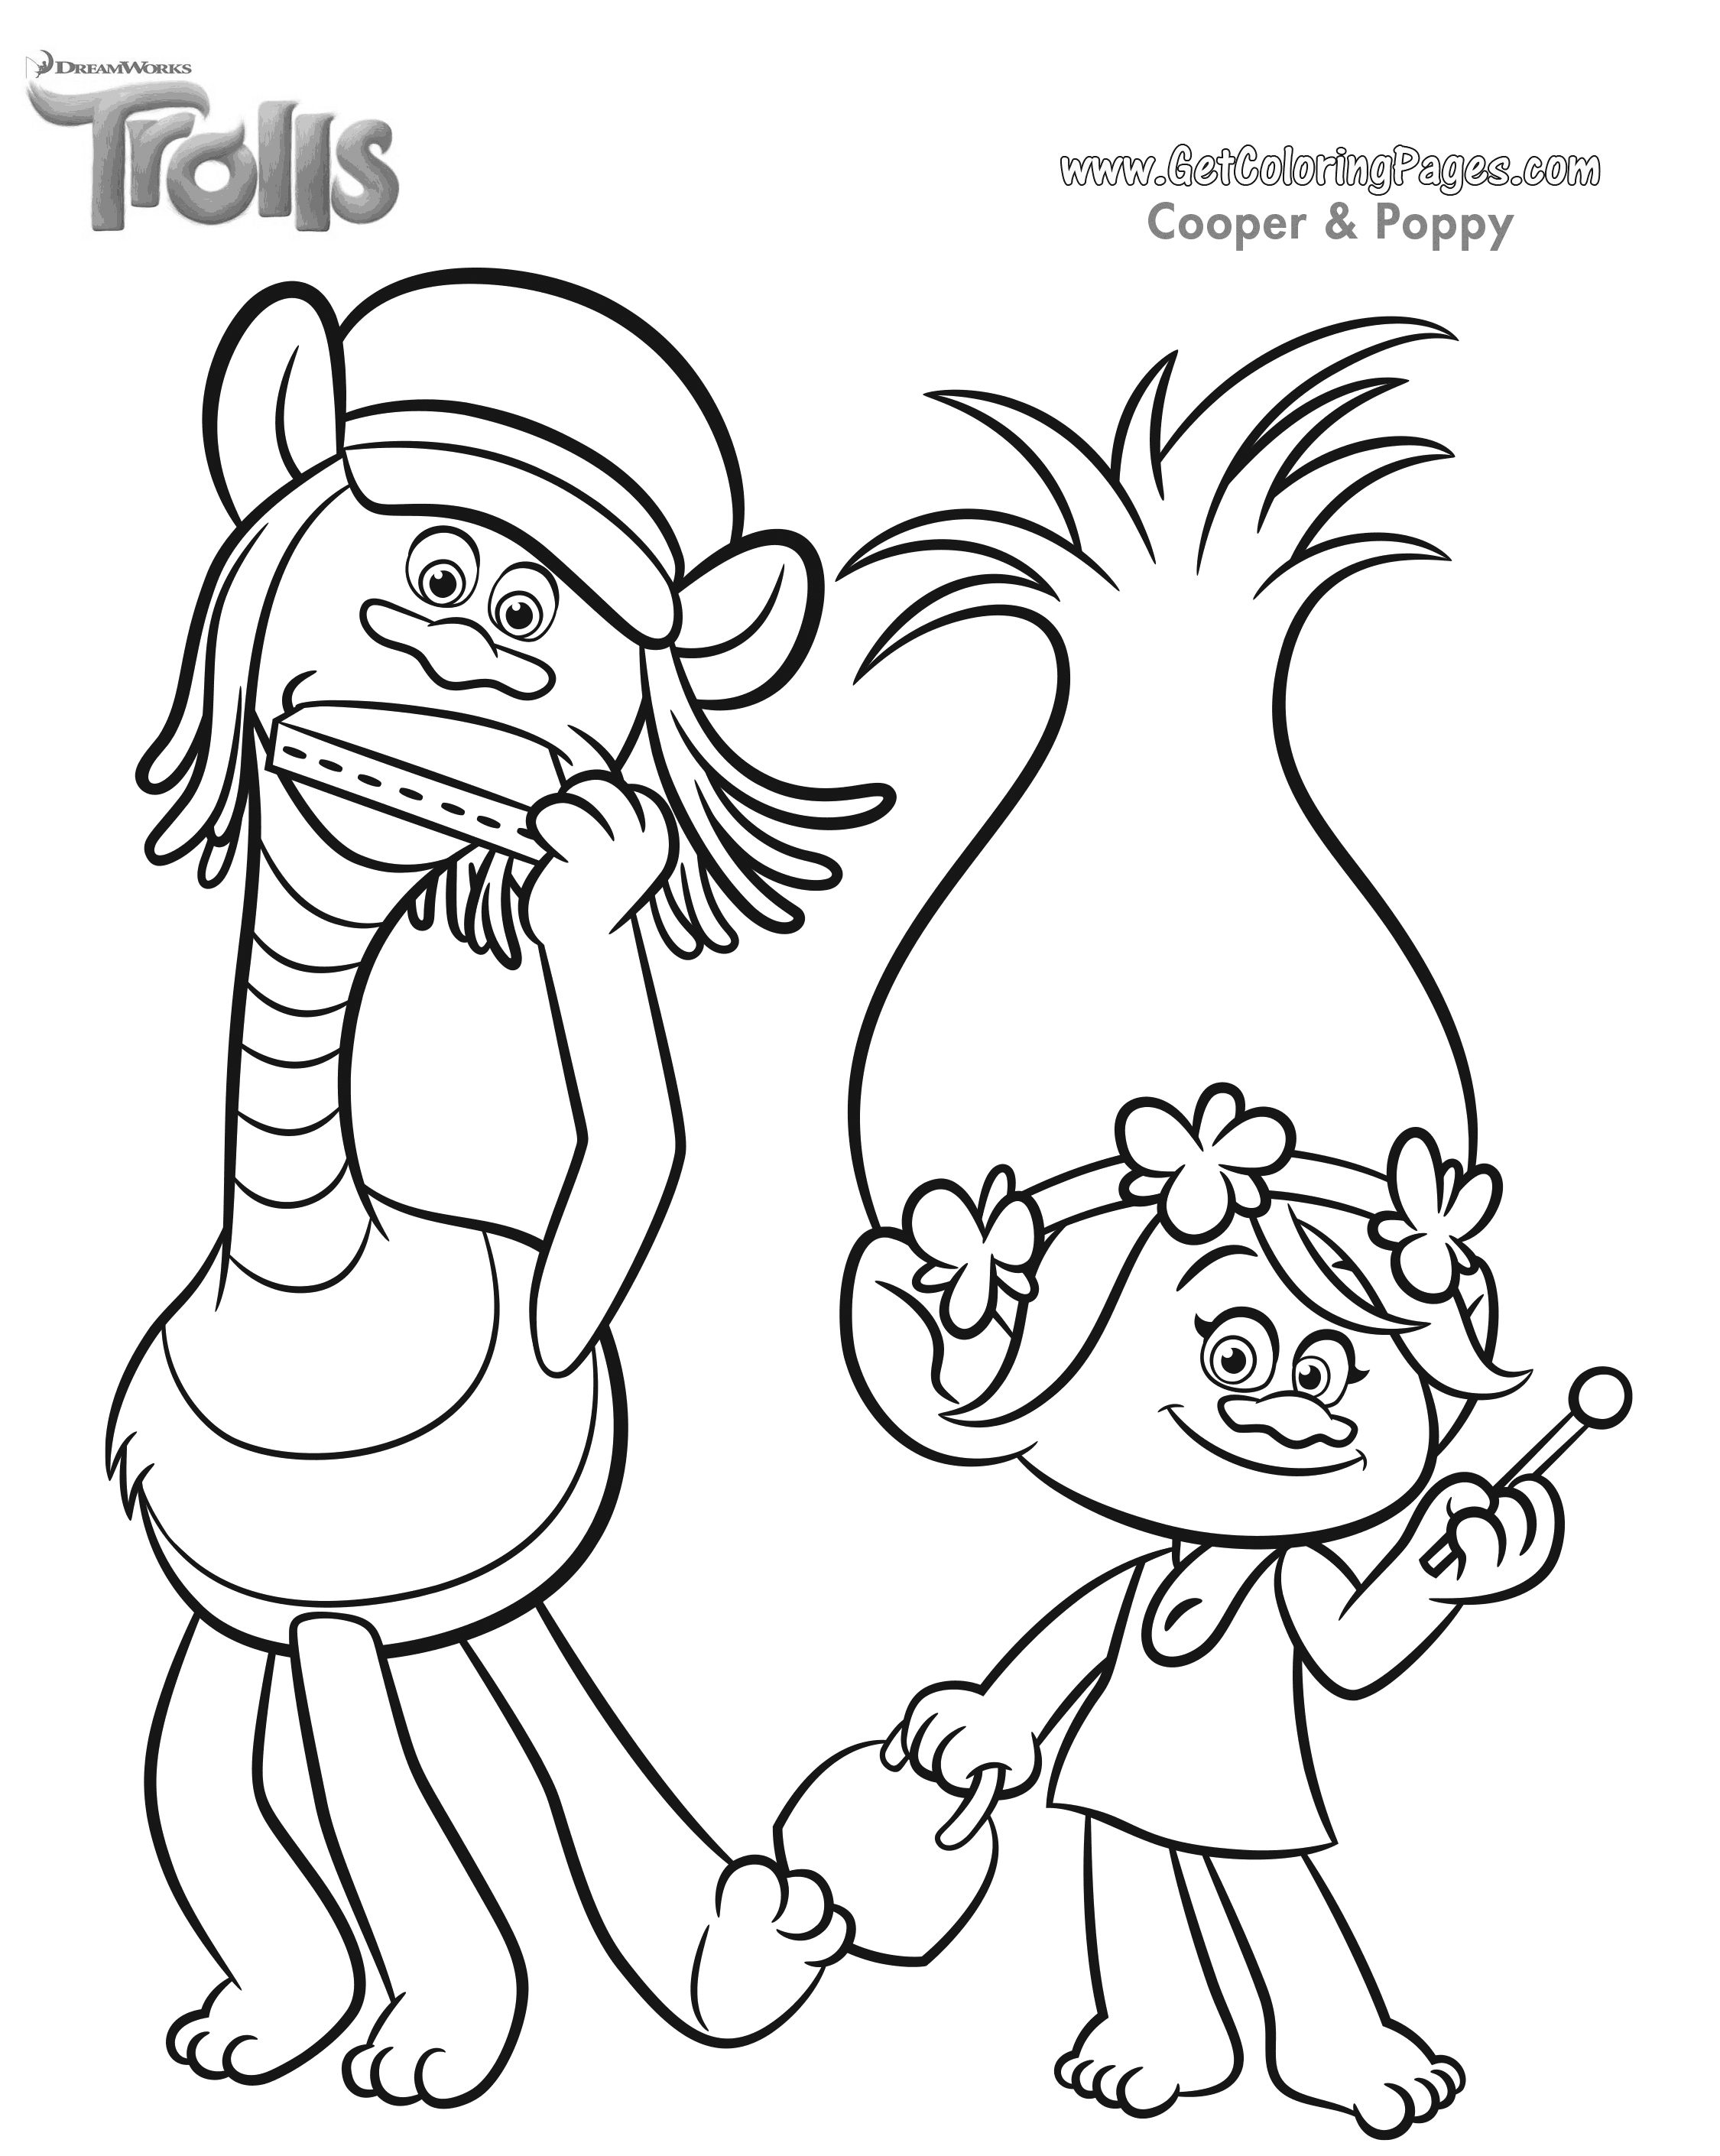 Dreamworks Trolls Coloring Pages - GetColoringPages.com ...